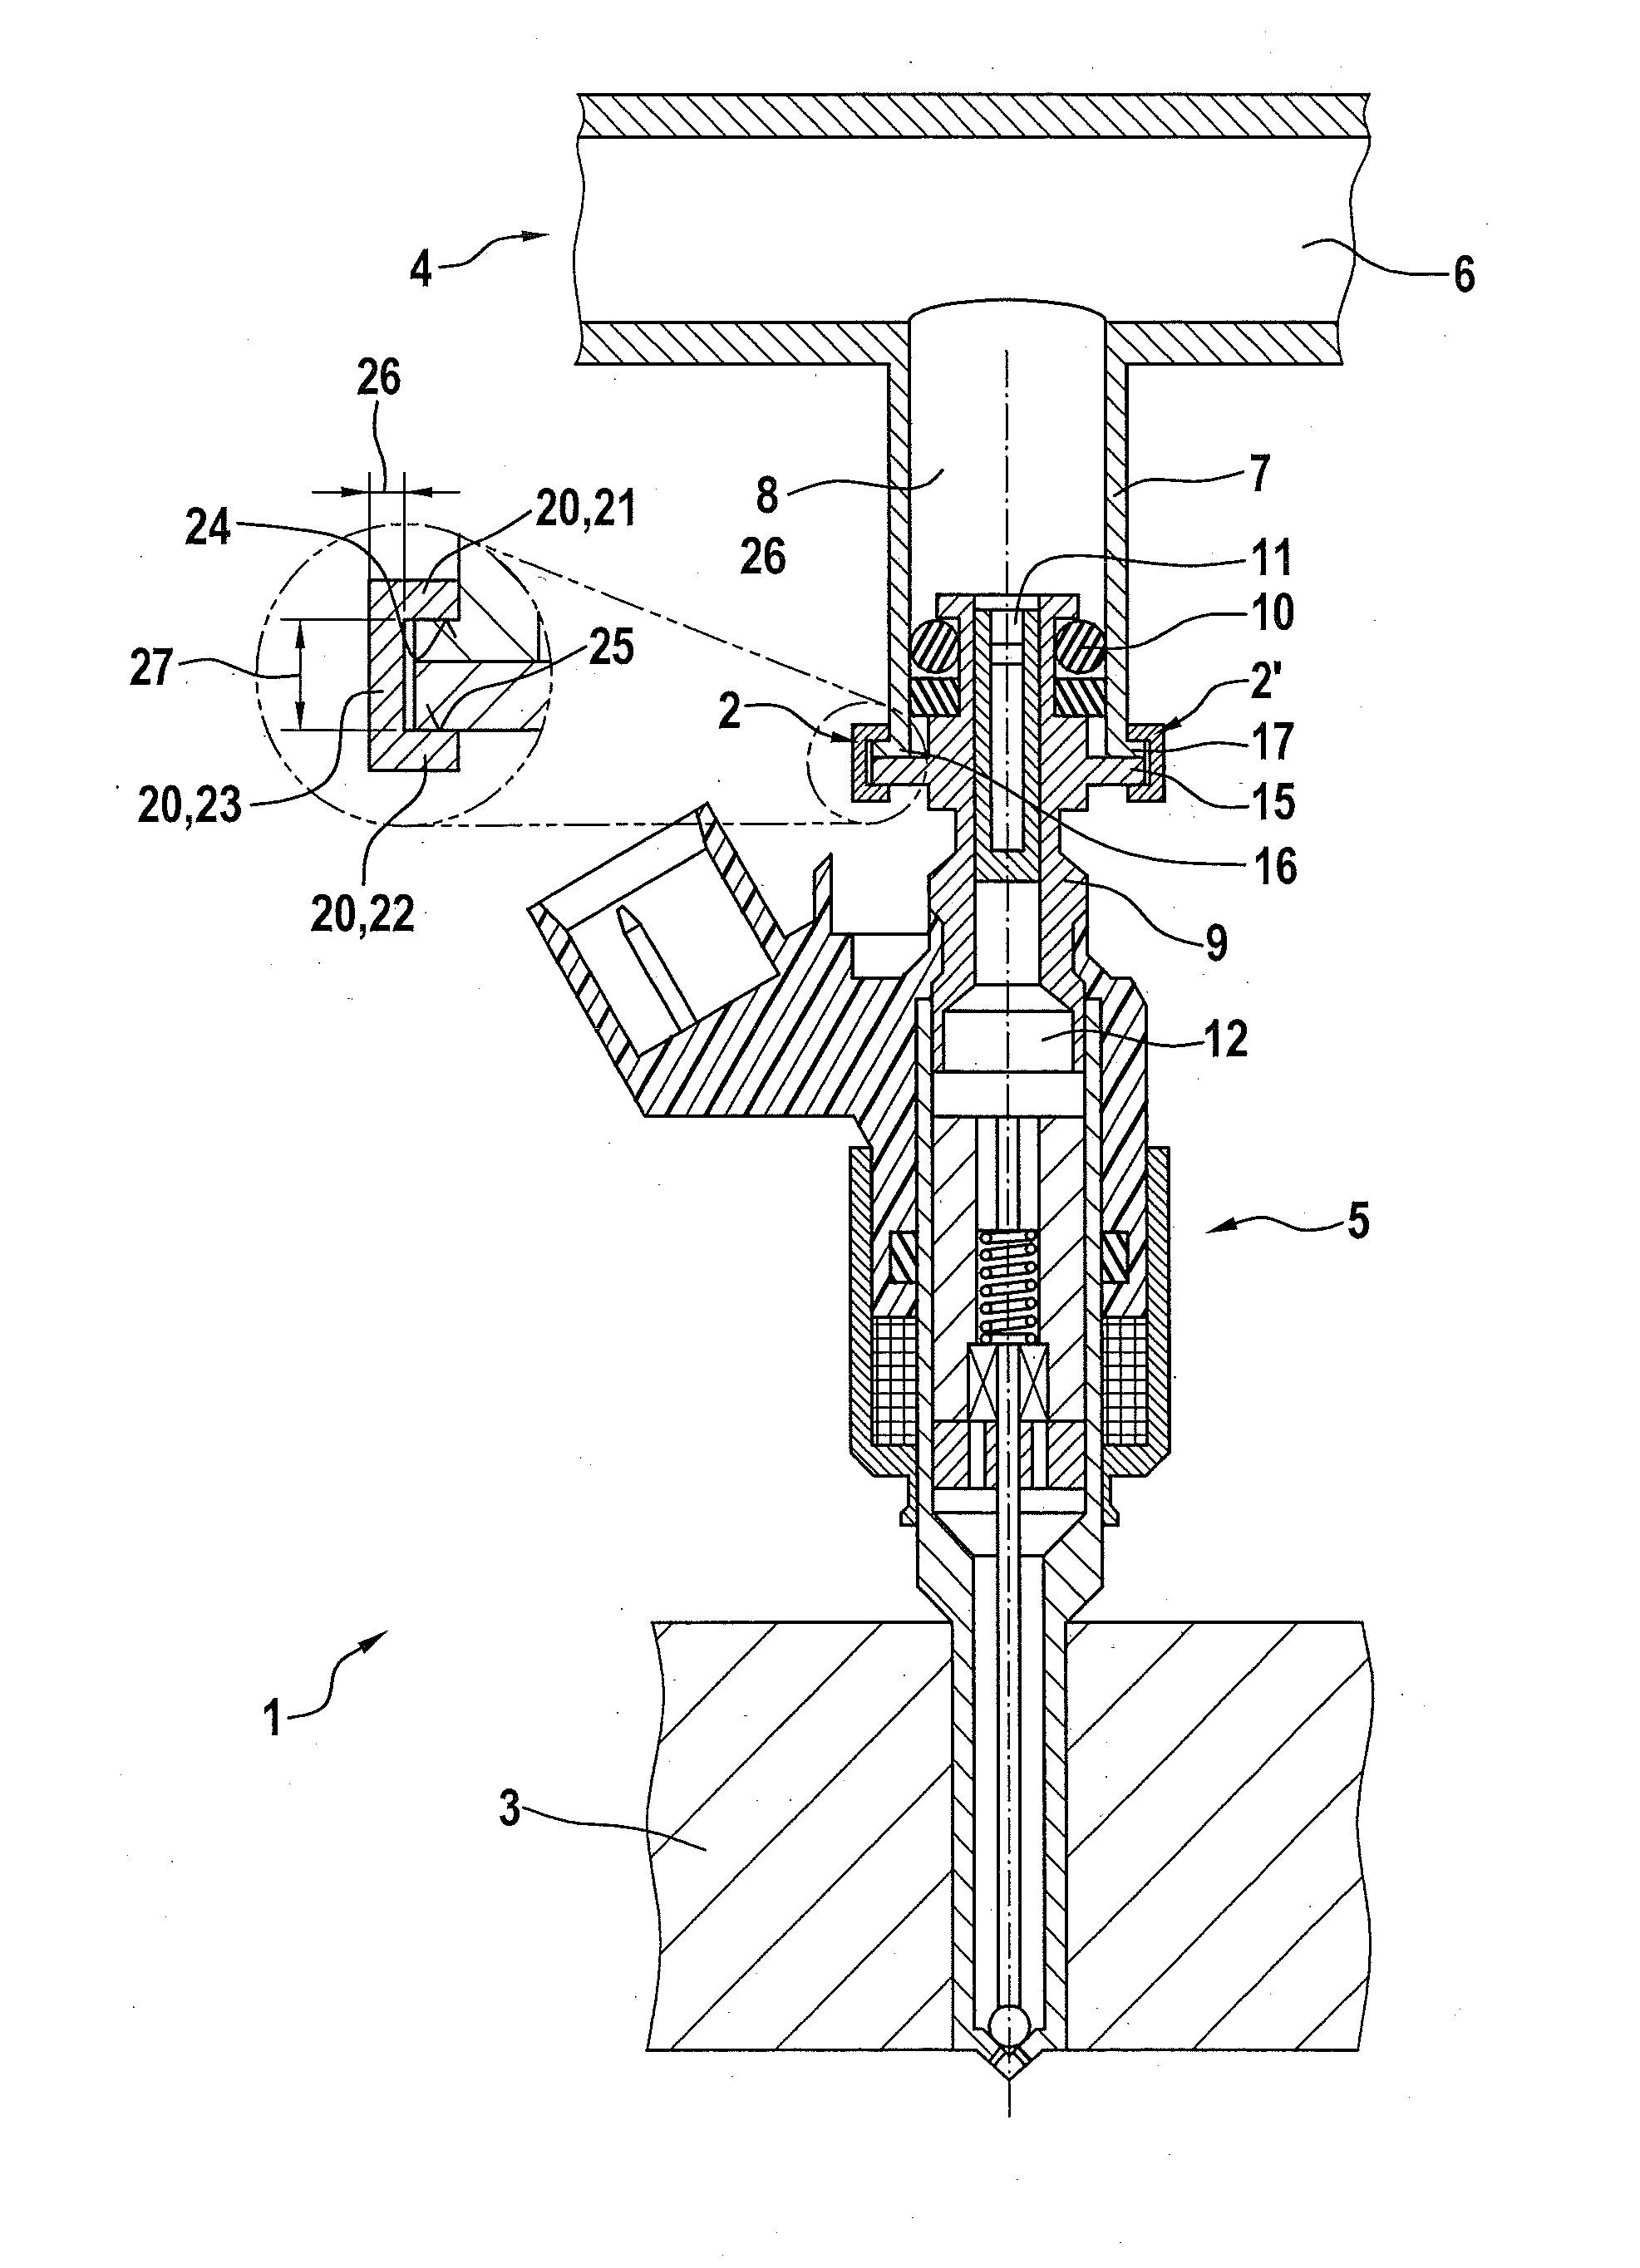 Fuel injection system having a fuel-carrying component, a fuel injector and a connecting element